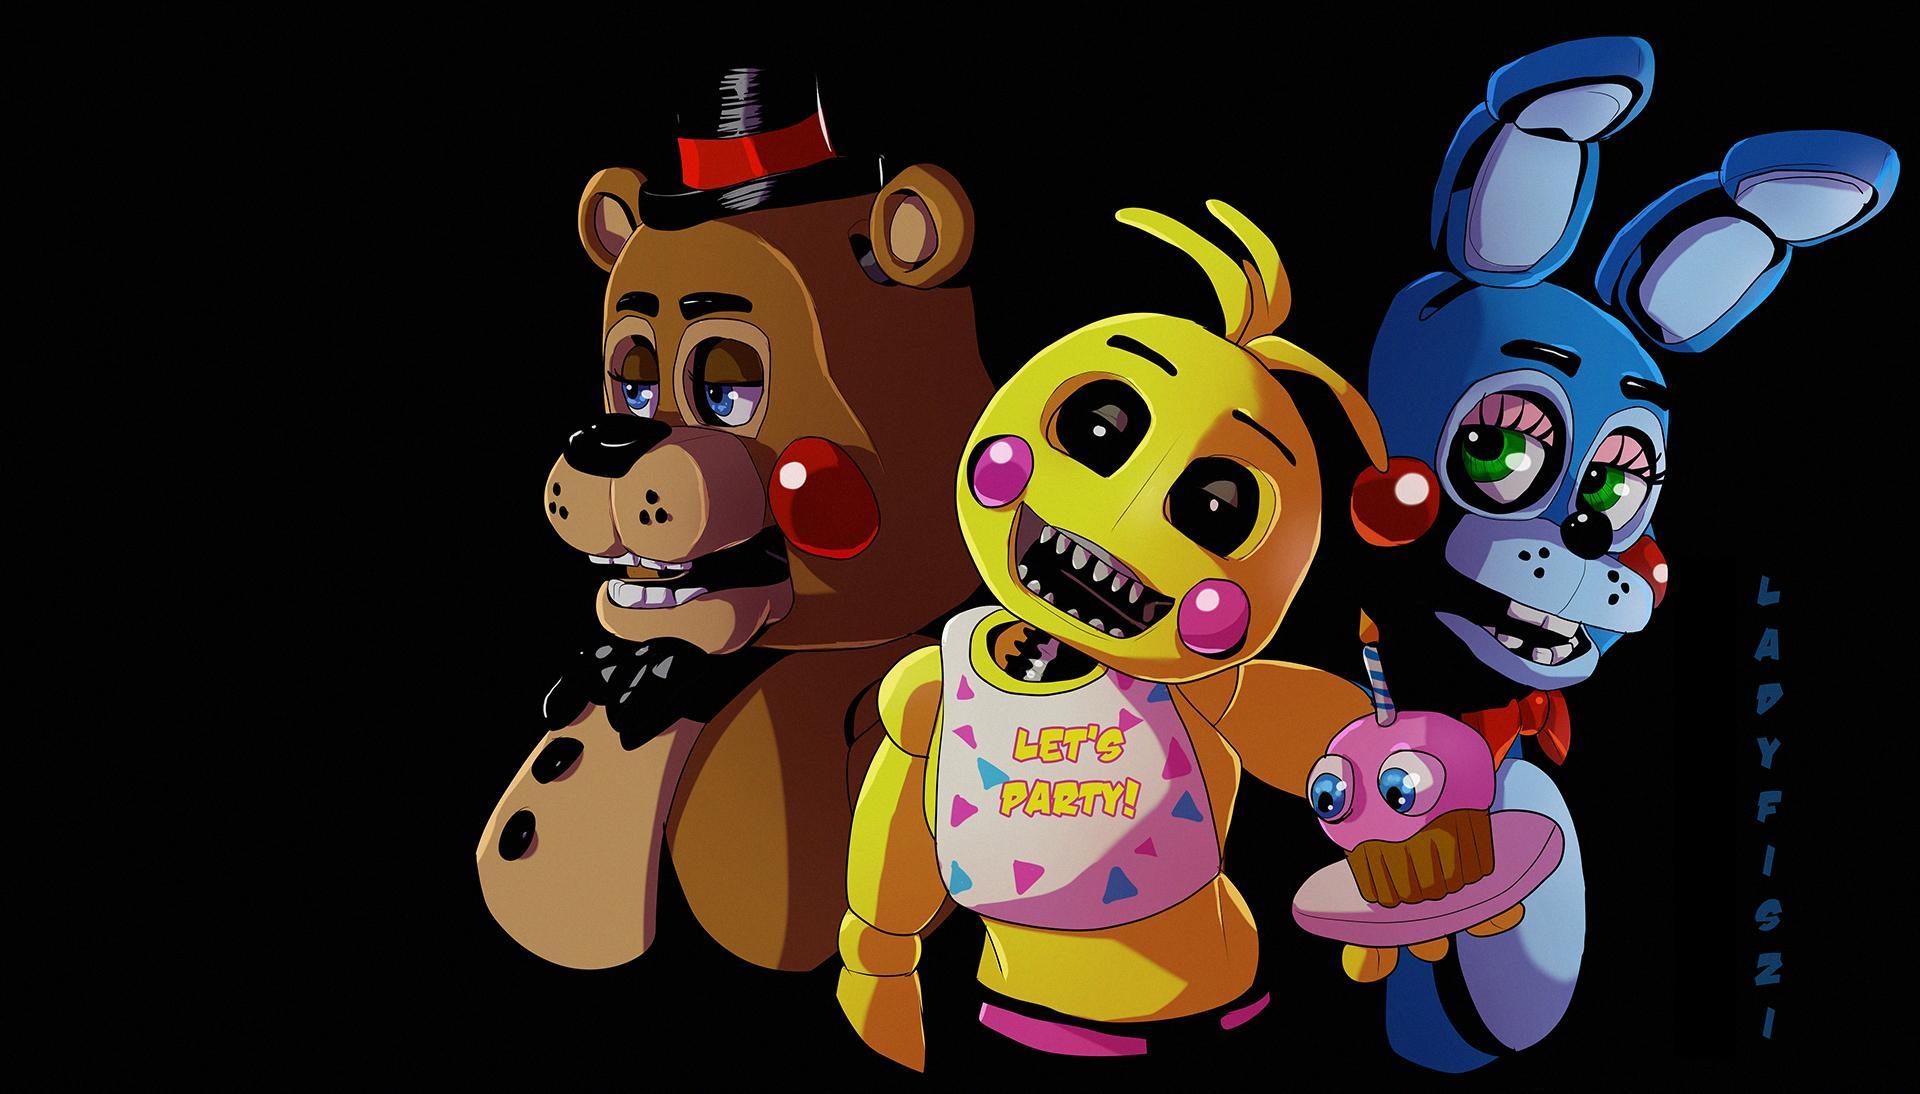 Five Nights At Freddy's 2 HD Wallpaper. Background Image